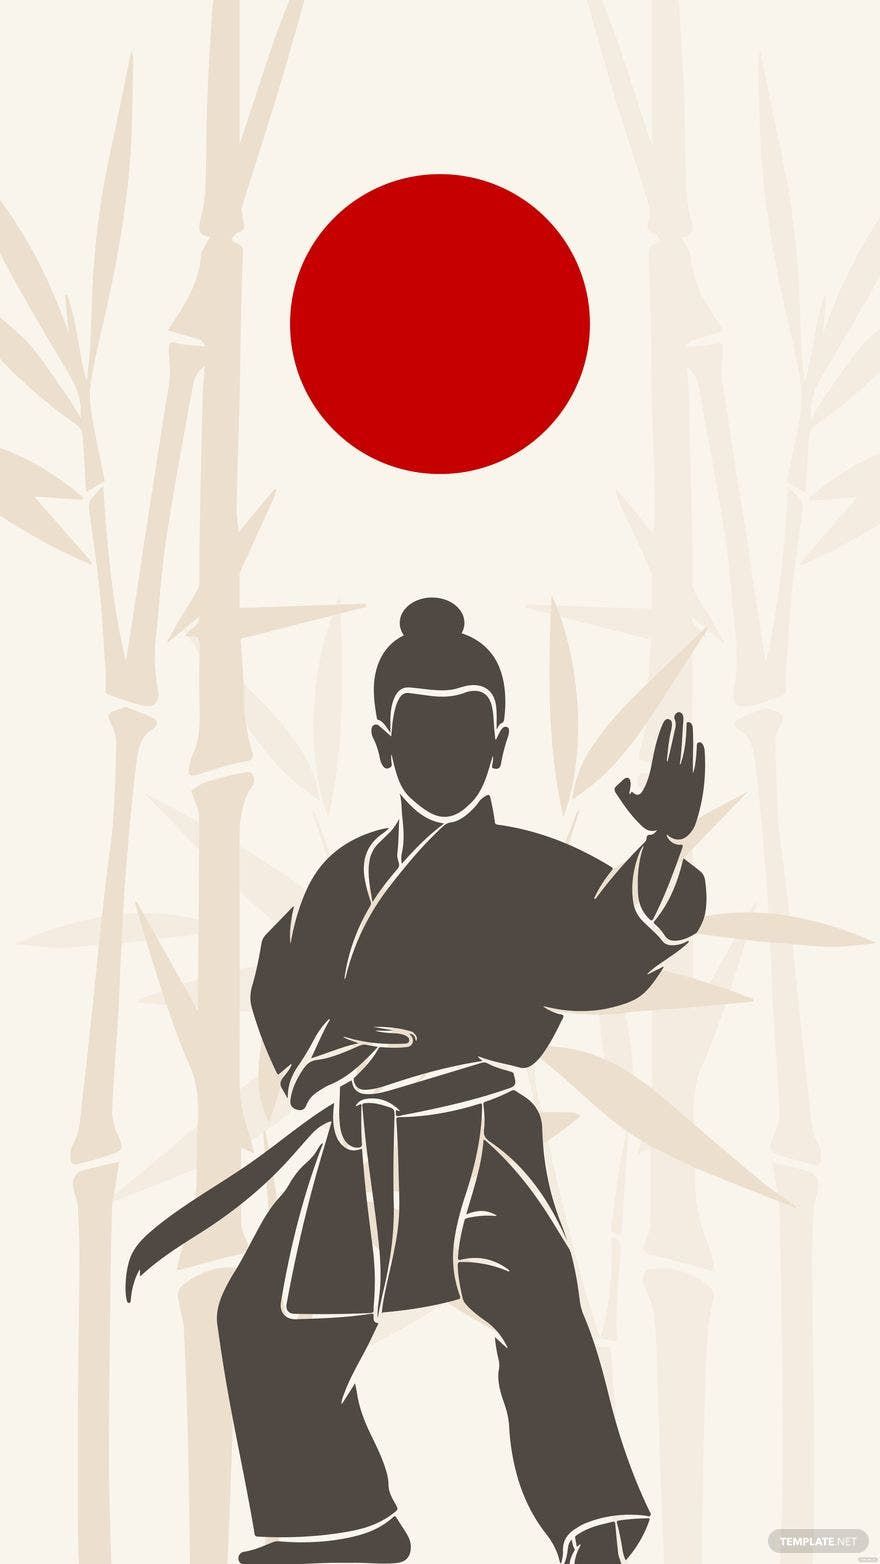 Free World Judo Day iPhone Background in PDF, Illustrator, PSD, EPS, SVG, JPG, PNG